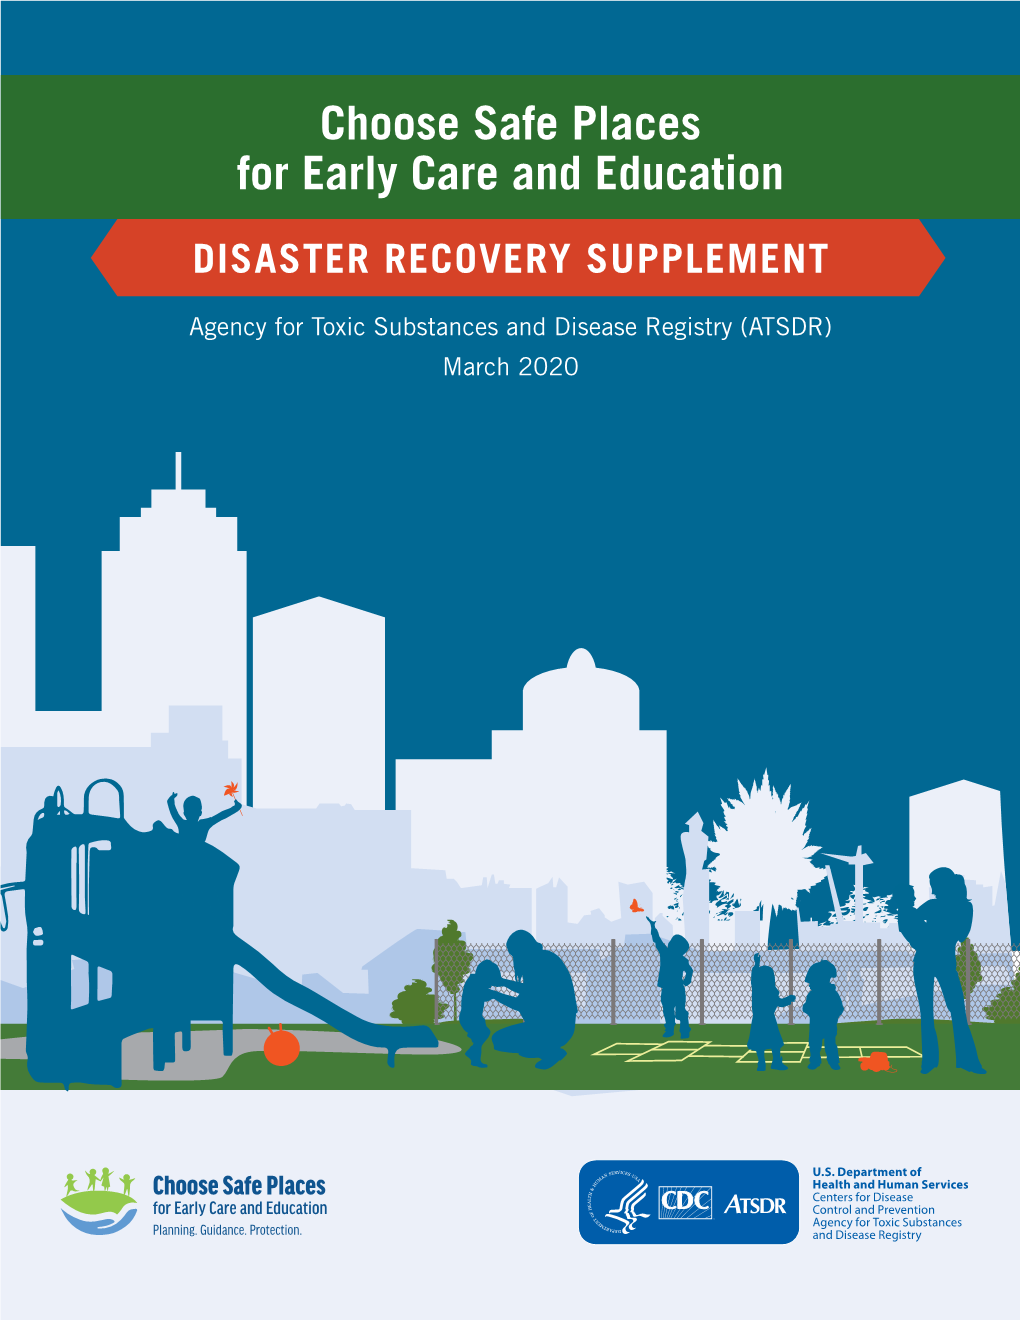 Choose Safe Places for Early Care and Education: Disaster Recovery